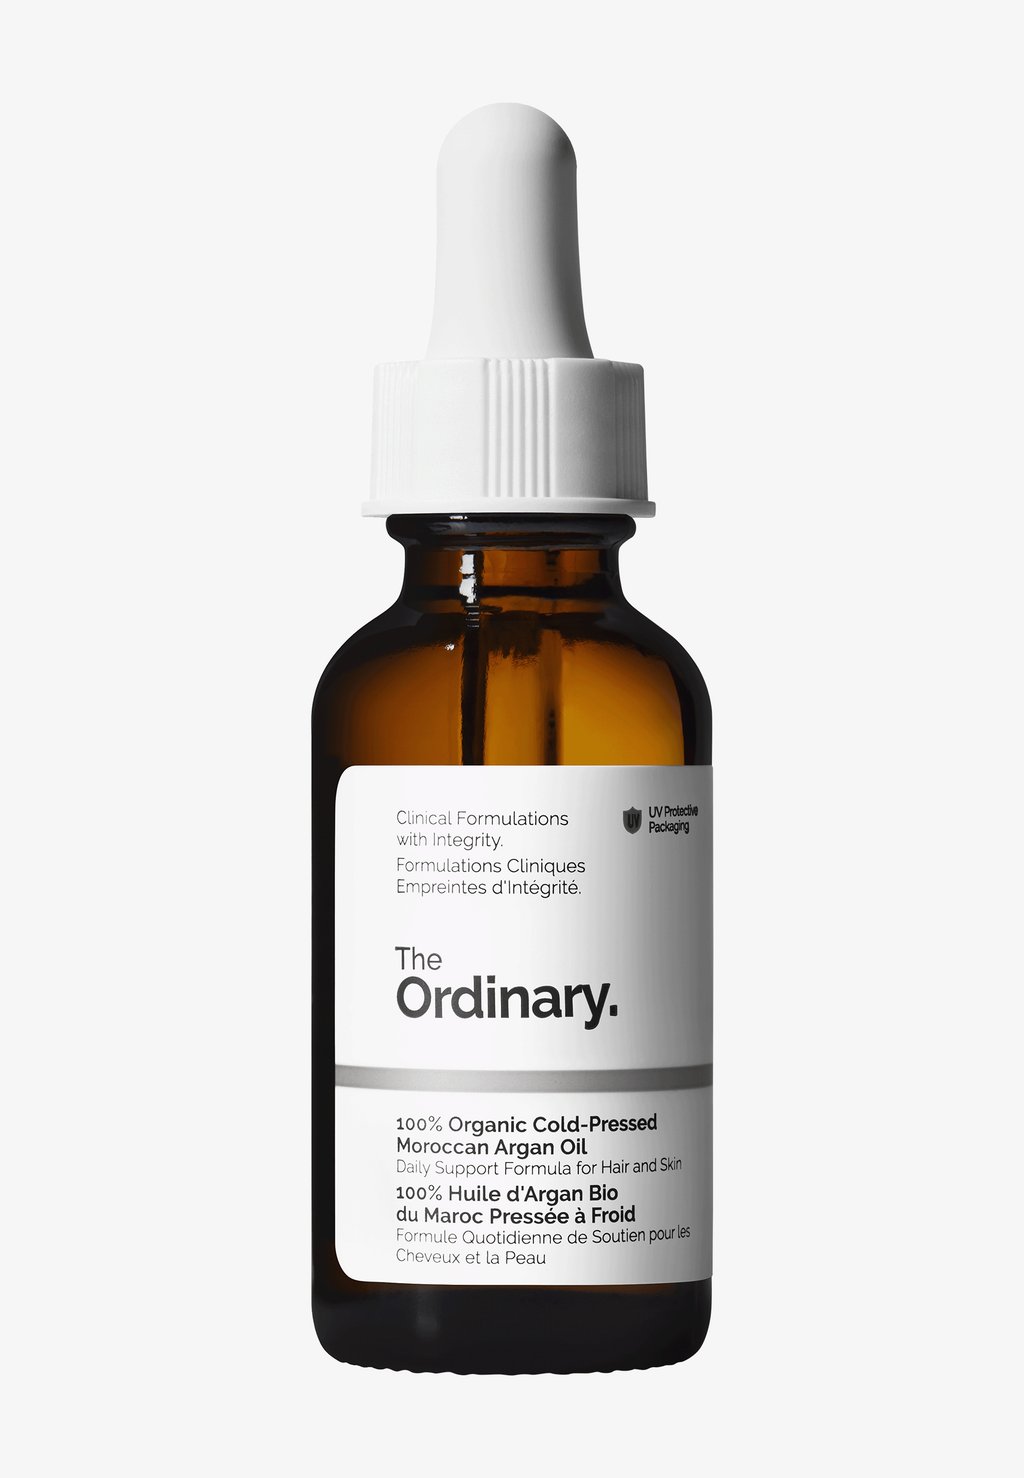 Антивозрастное Cold Pressed Moroccan Argan Oil The Ordinary the ordinary 100% organic cold pressed moroccan argan oil аргановое масло 30 мл